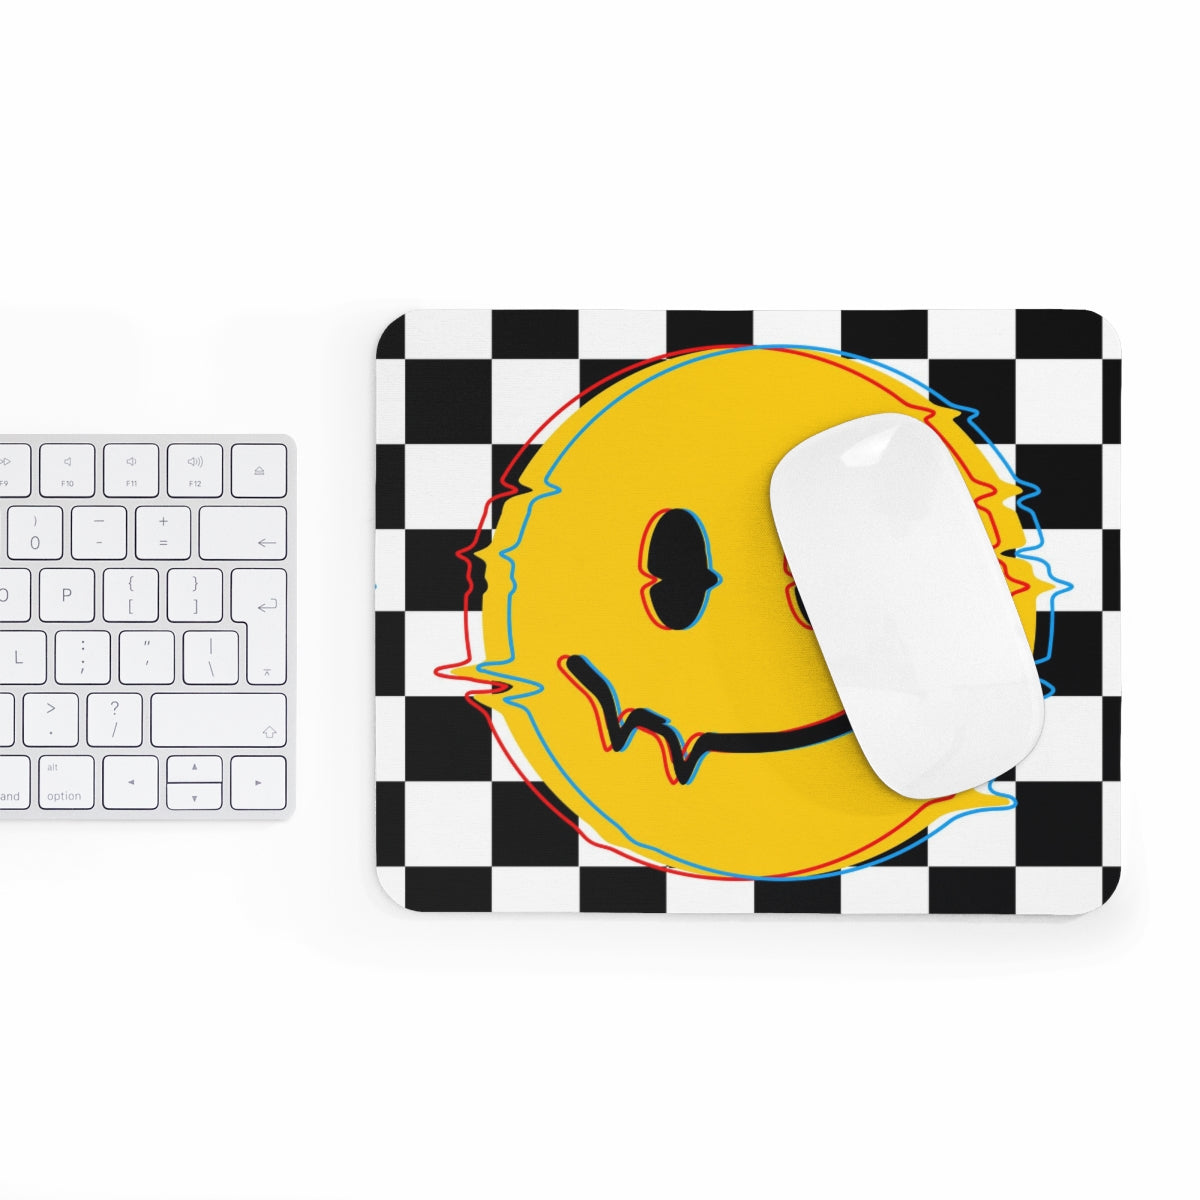 Funny Acid Smile - Mouse Pad